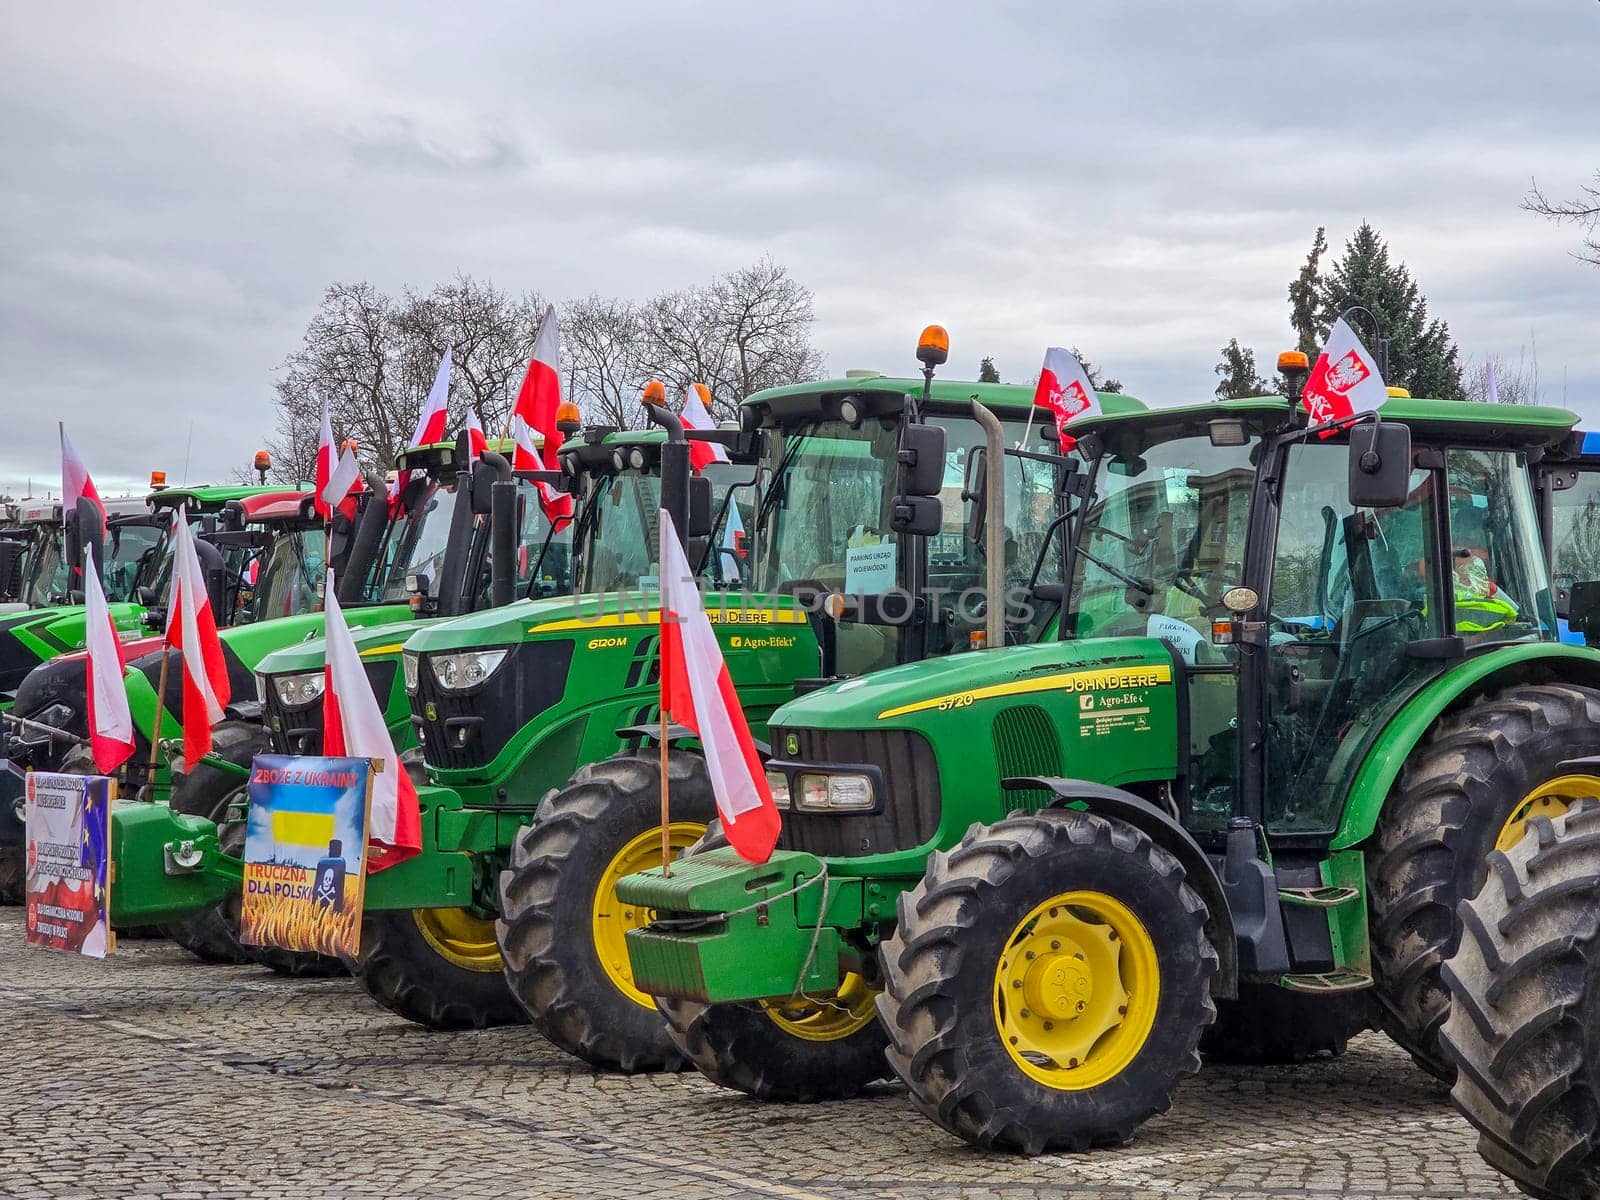 Wroclaw, Poland, February 15, 2024: Farmers protest against the European Union's anti-agricultural policies. Several farm tractors are parked under a cloudy sky